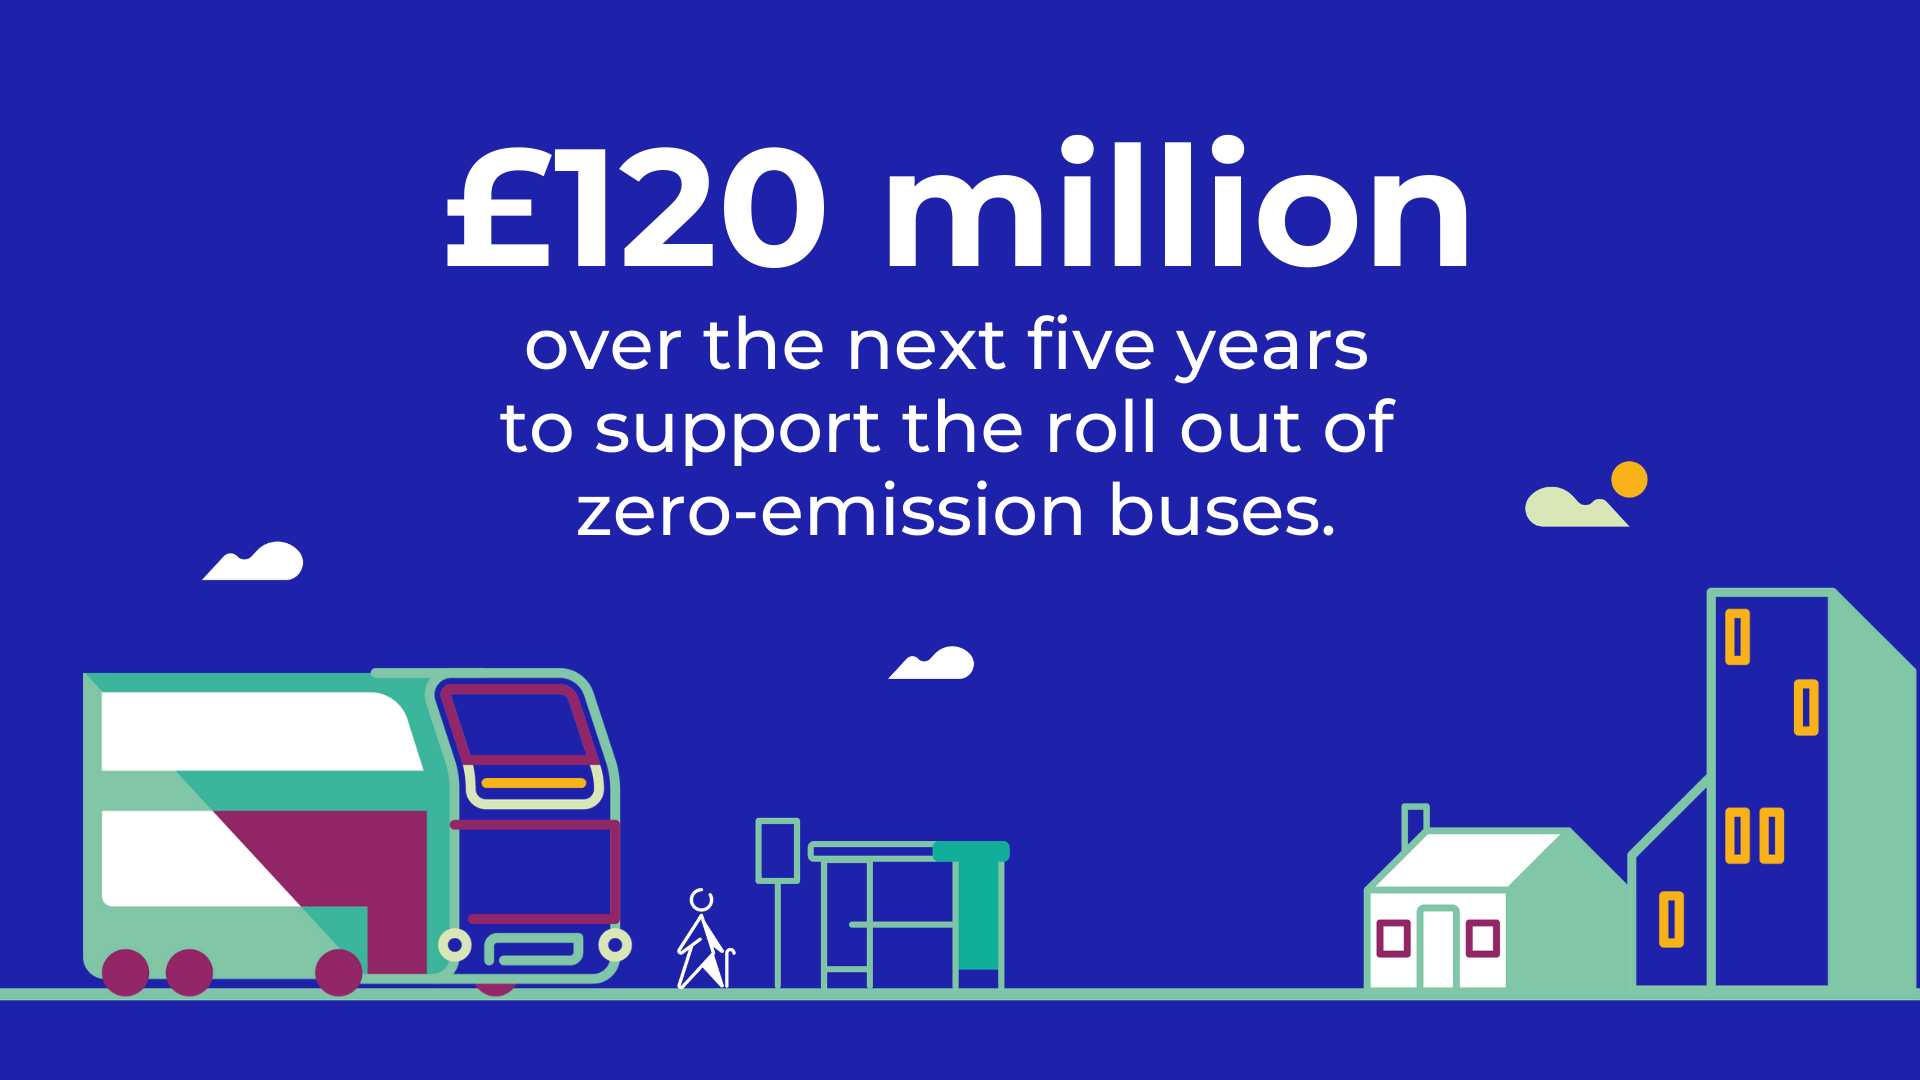 Icon scene showing a Bus, person walking with a stick, bus stop and houses, with text saying "£120 million over the next five years to support the roll out of zero-emission buses."